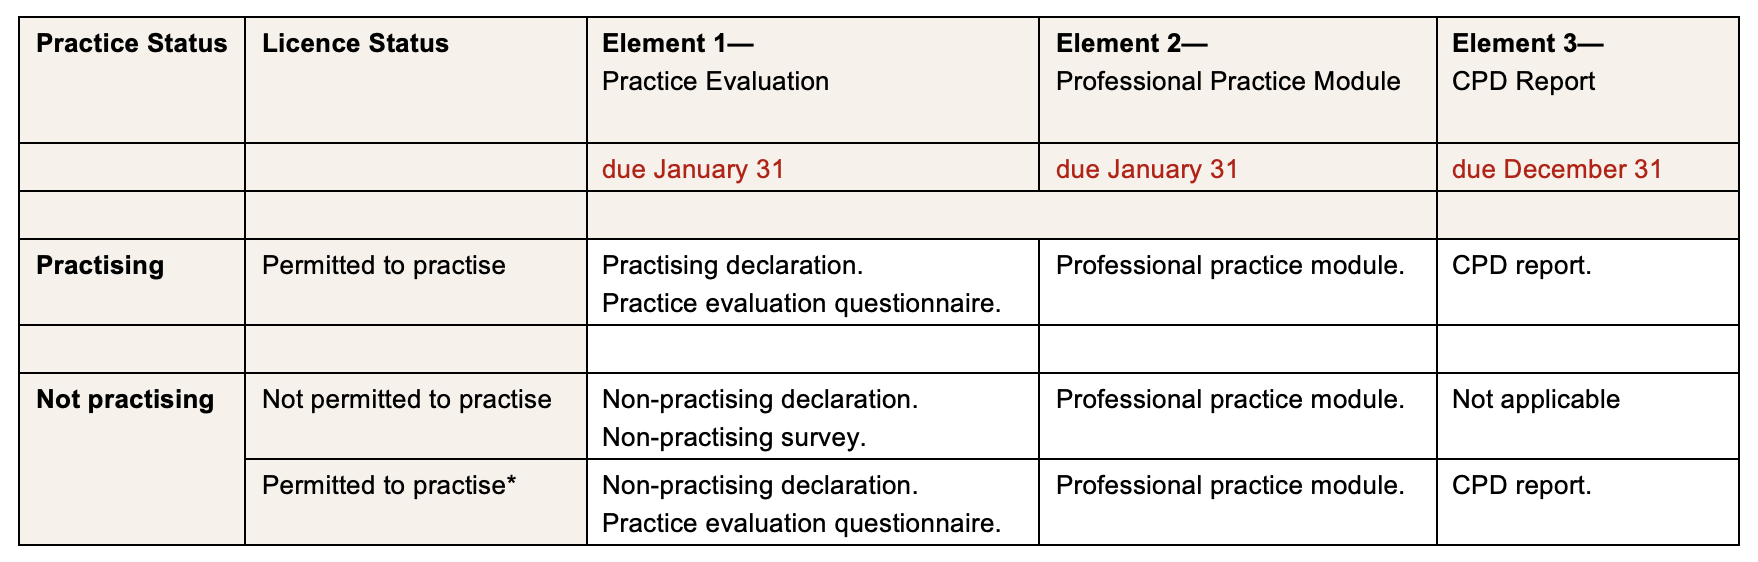 Table showing the three elements of the PEAK program based on practice and licence statuses and corresponding deadlines.